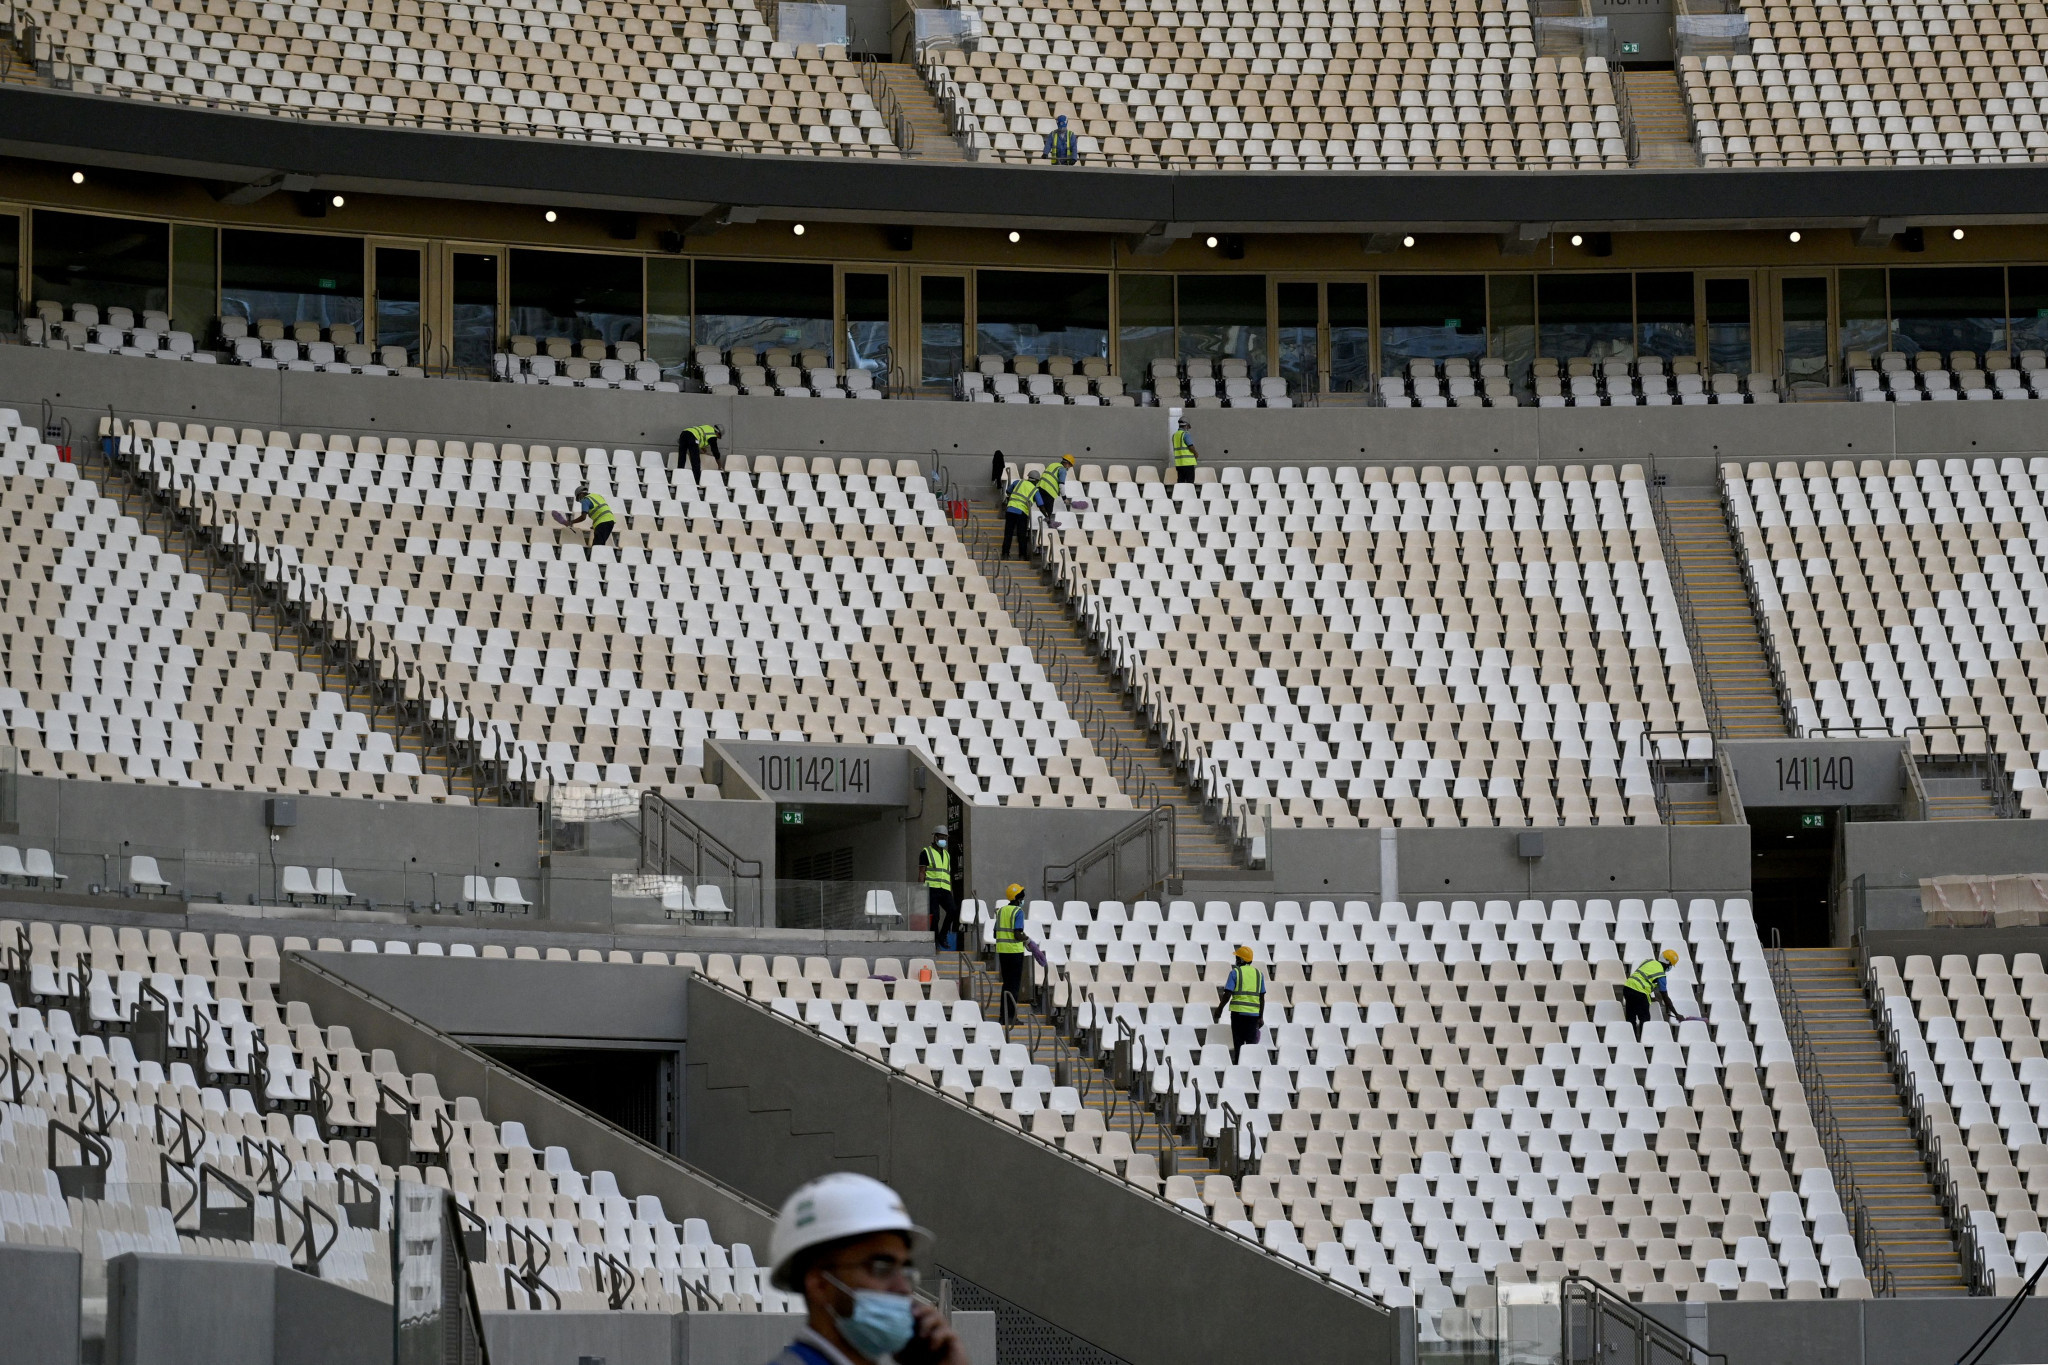 Many migrant workers from the Qatar 2022 FIFA World Cup have reported wage theft and inability to obtain overtime pay among other abuses ©Getty Images